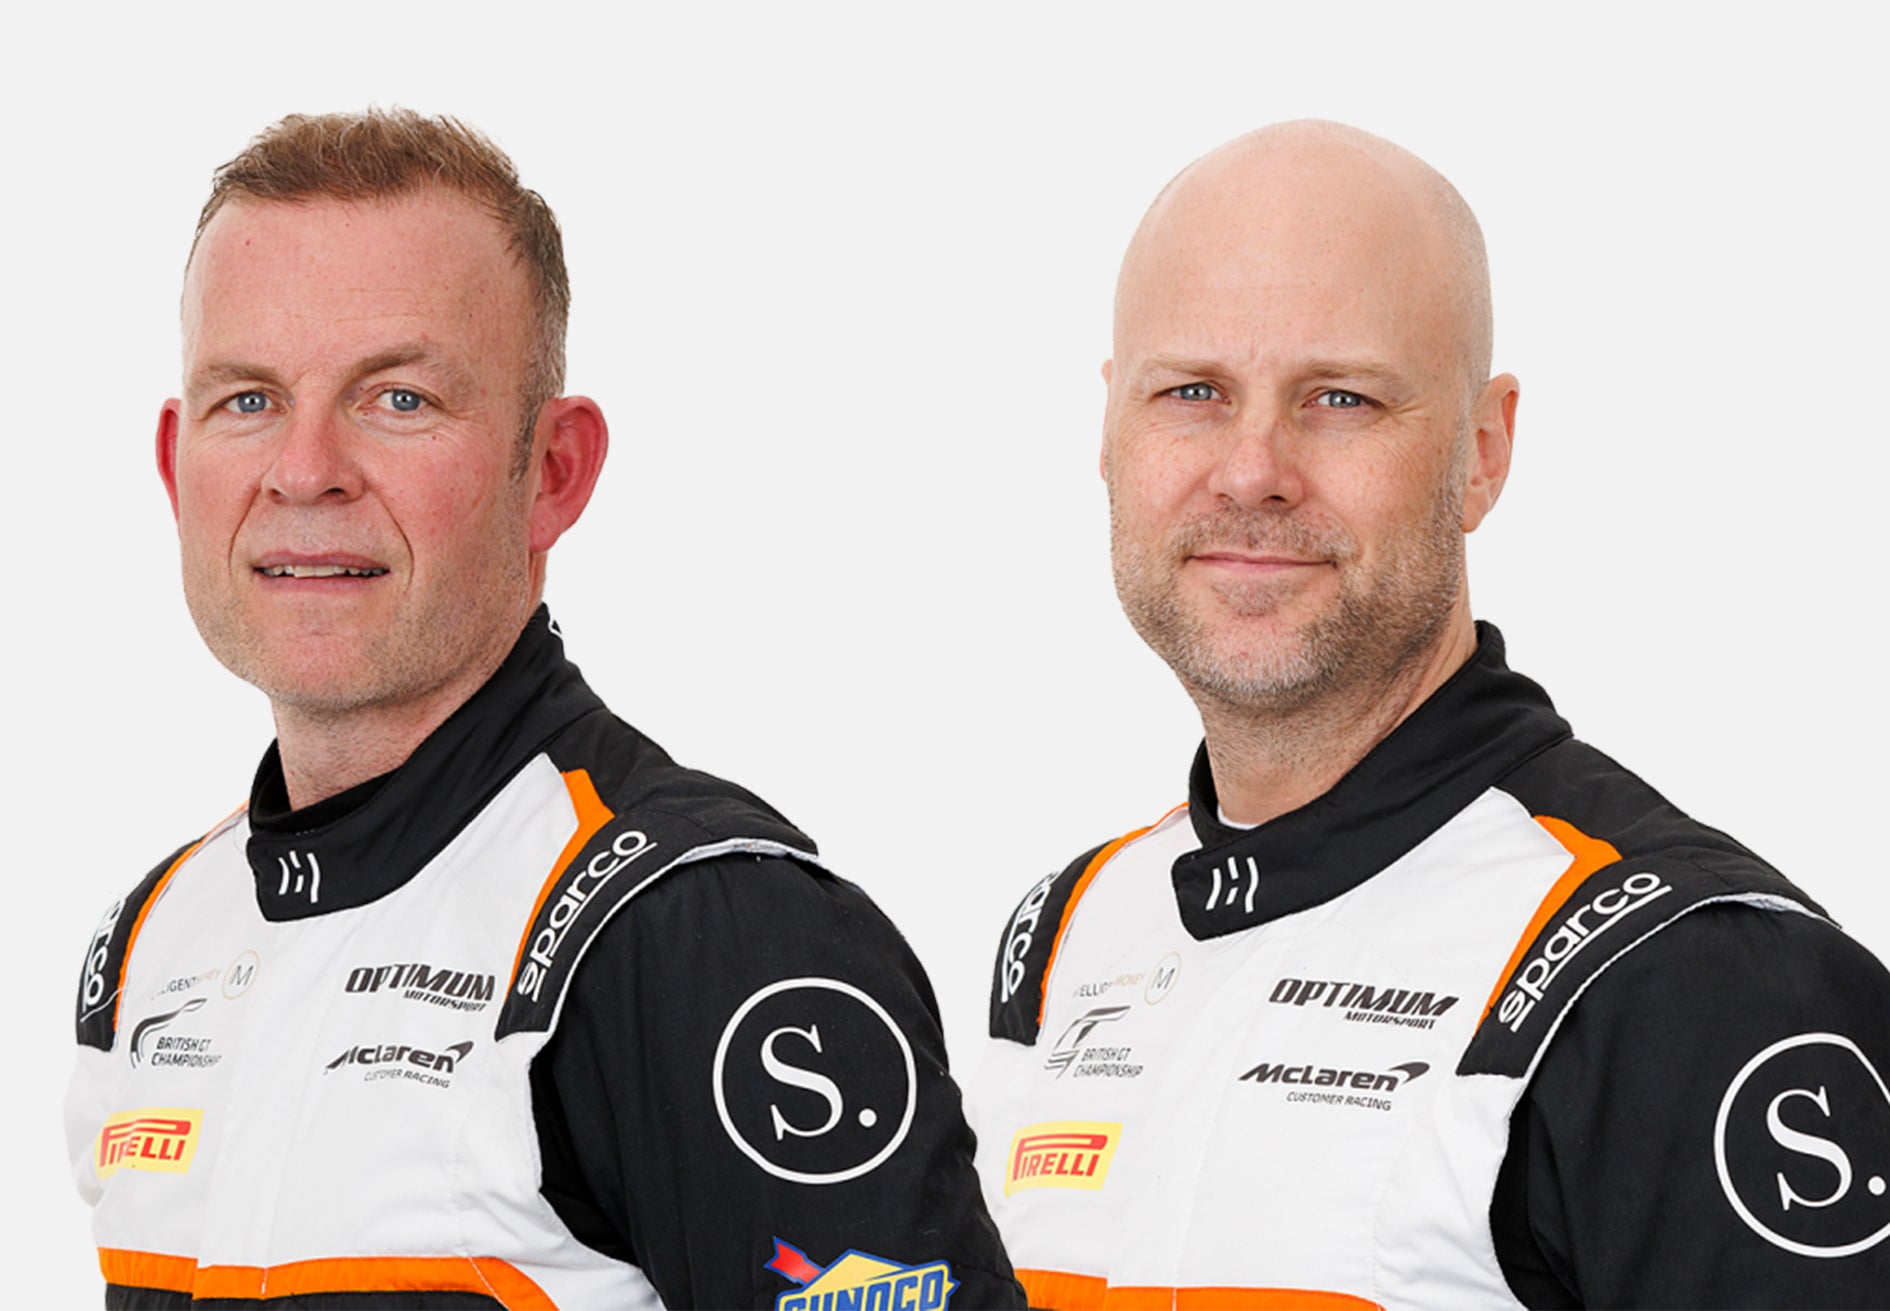 Meet the Drivers: Rob Bell & Mark Radcliffe